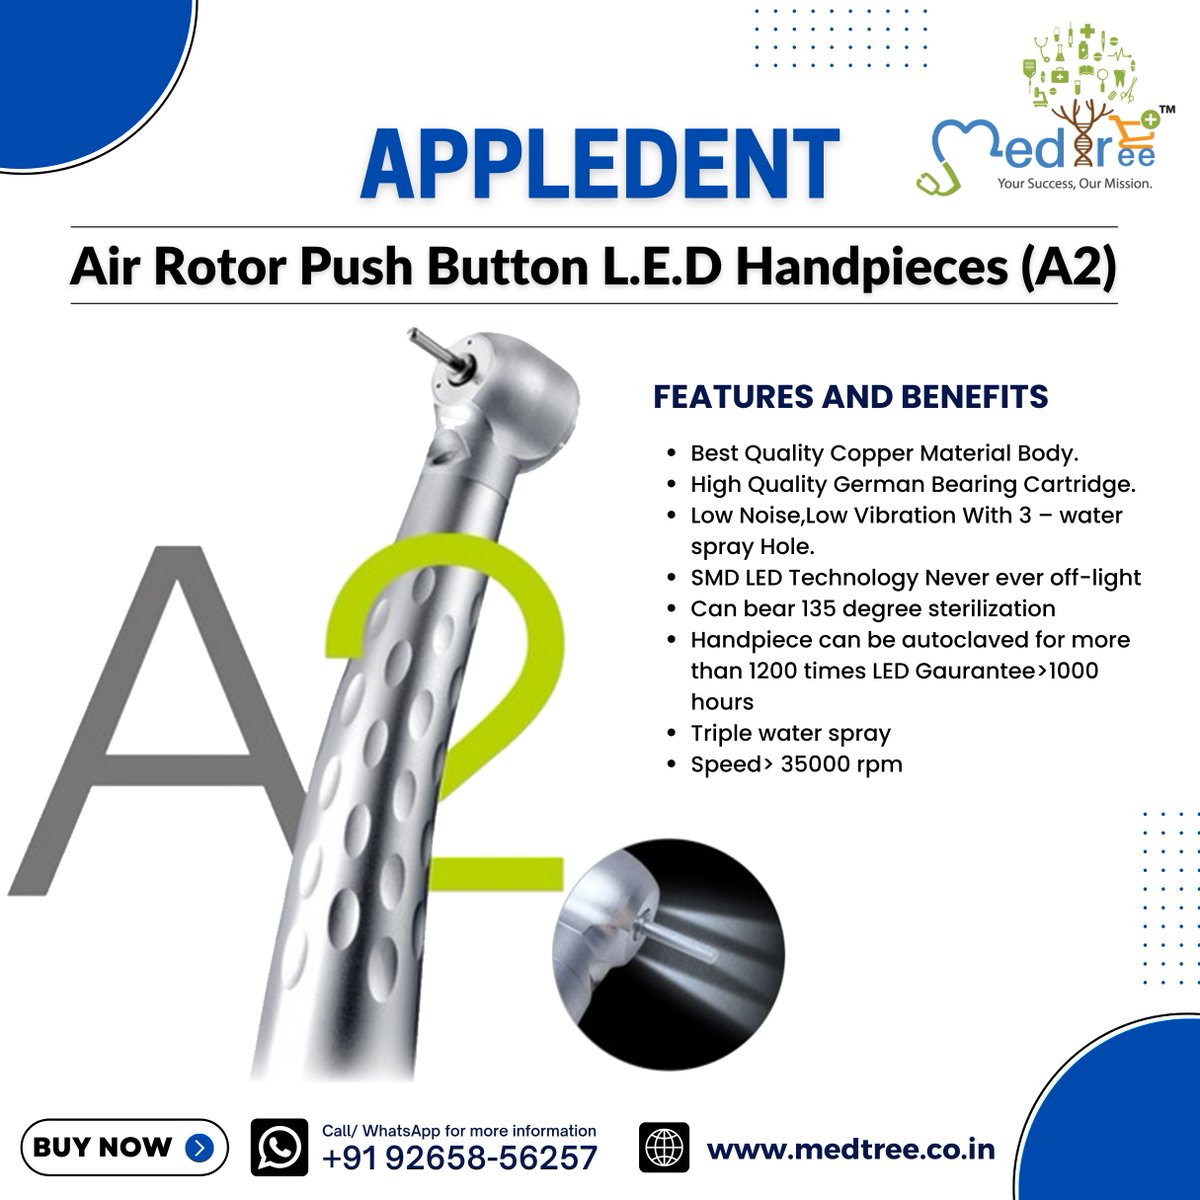 Appledent Air Rotor Push Button LED Handpieces A2
Buy: medtree.co.in/product/appled…

#AppleDental #dentalairrotor #AIRROTOR #DentalHandpiece #dentalinstrument #dentalproducts #dentist #MedTree #medtreeindia #onlinedentalproducts #buyonline #newproduct #appledentalproducts #dentaloffer